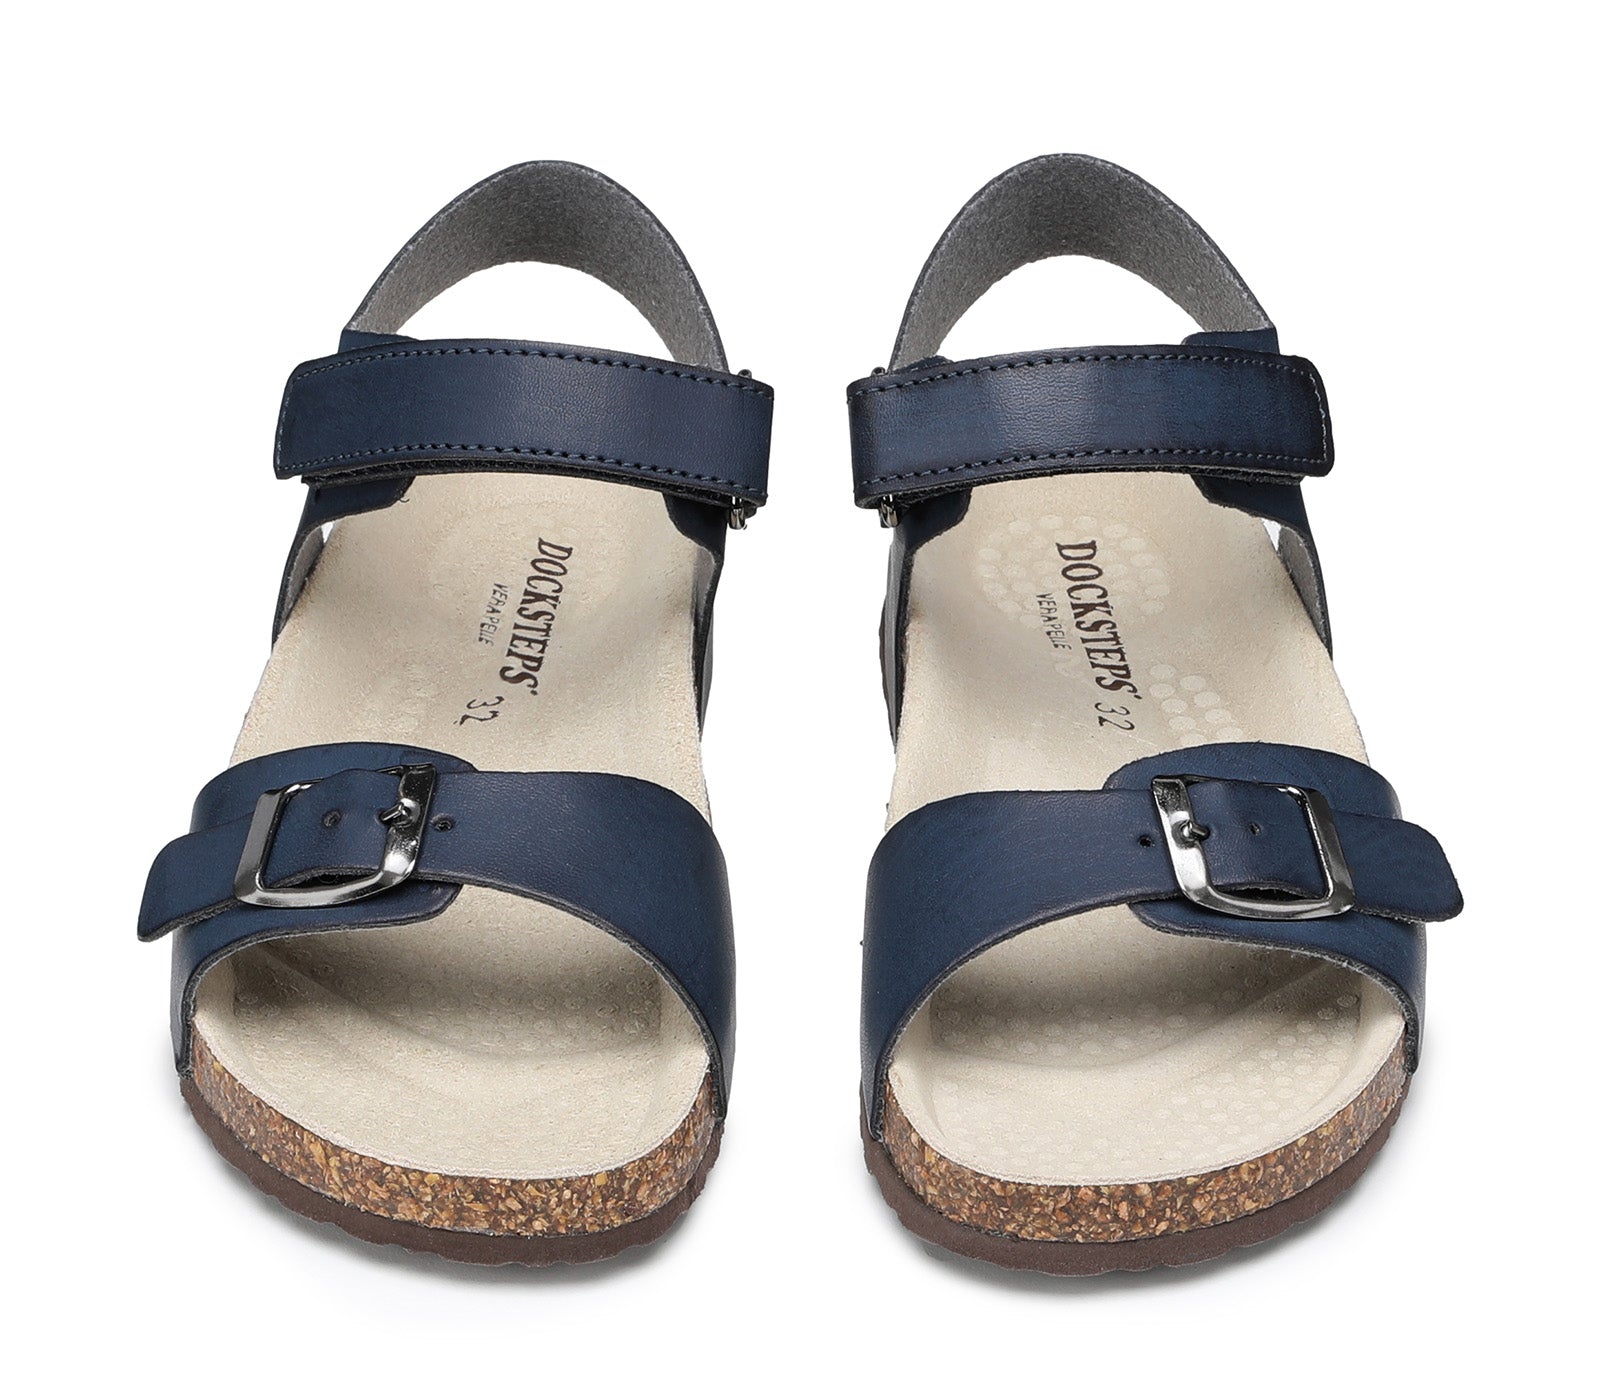 Baby Blue Sandals with Velcro Closure and Contoured Insole